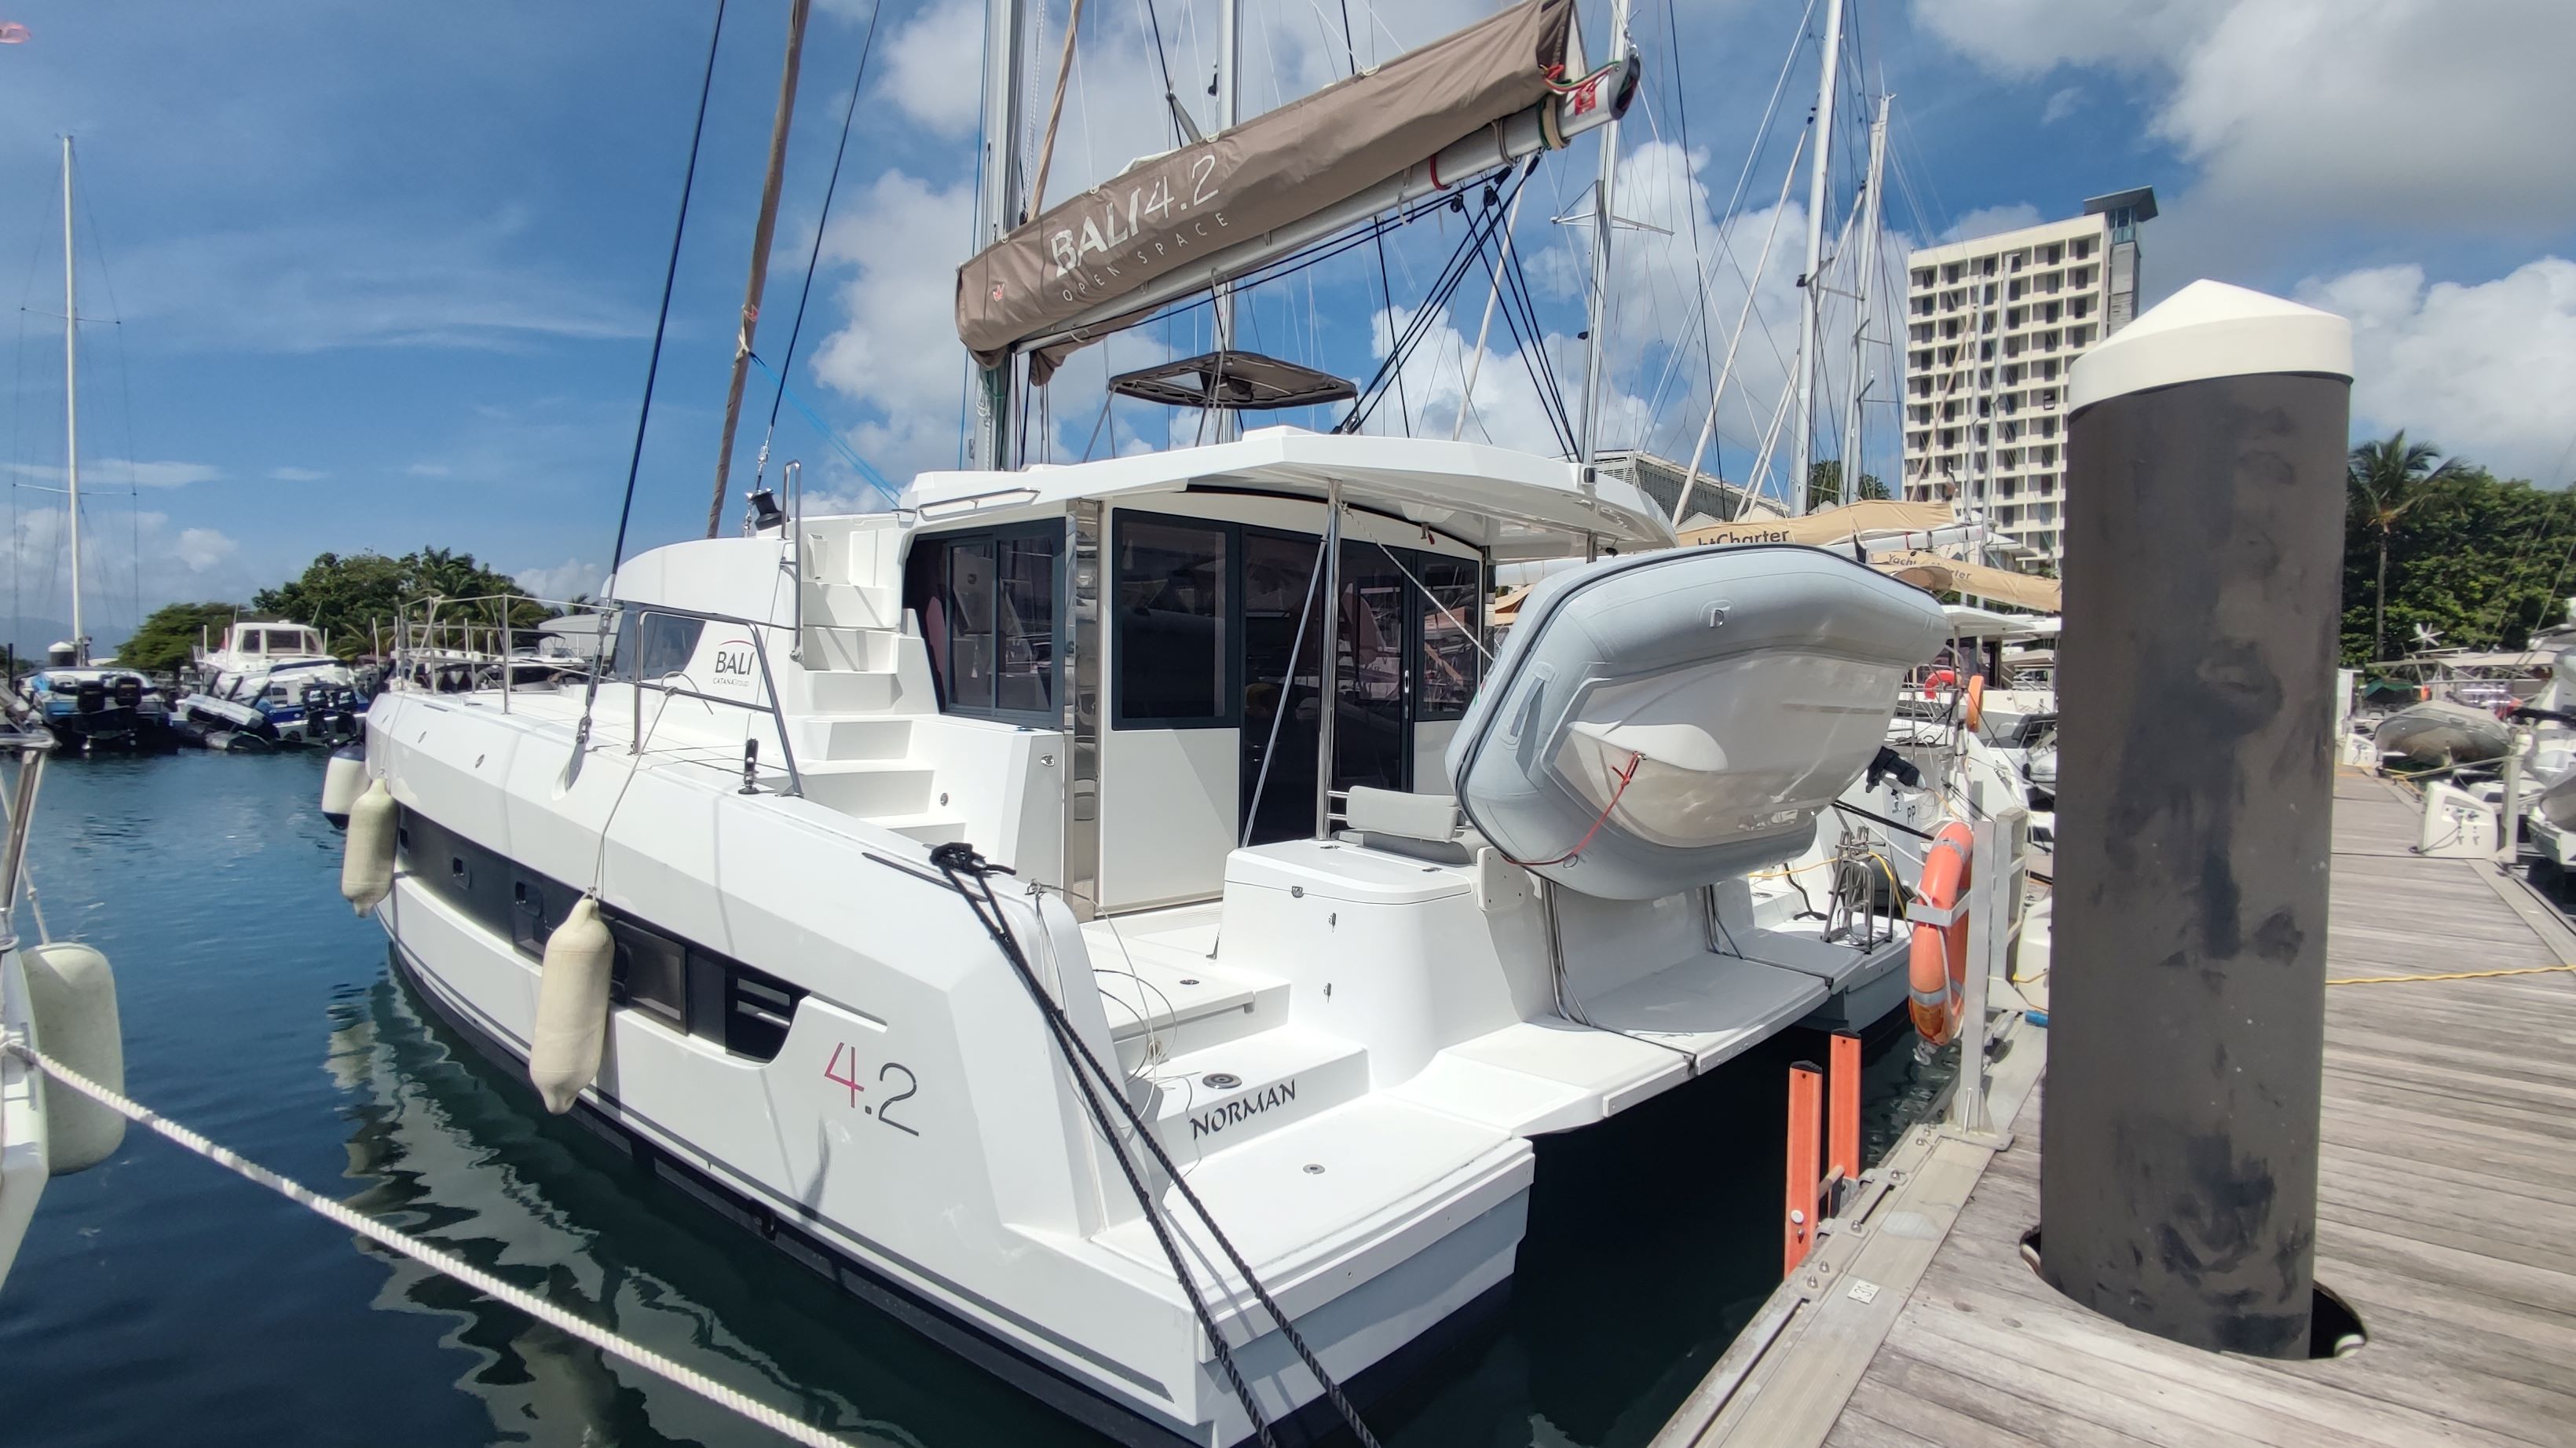 Norman Bareboat Charter in Guadeloupe